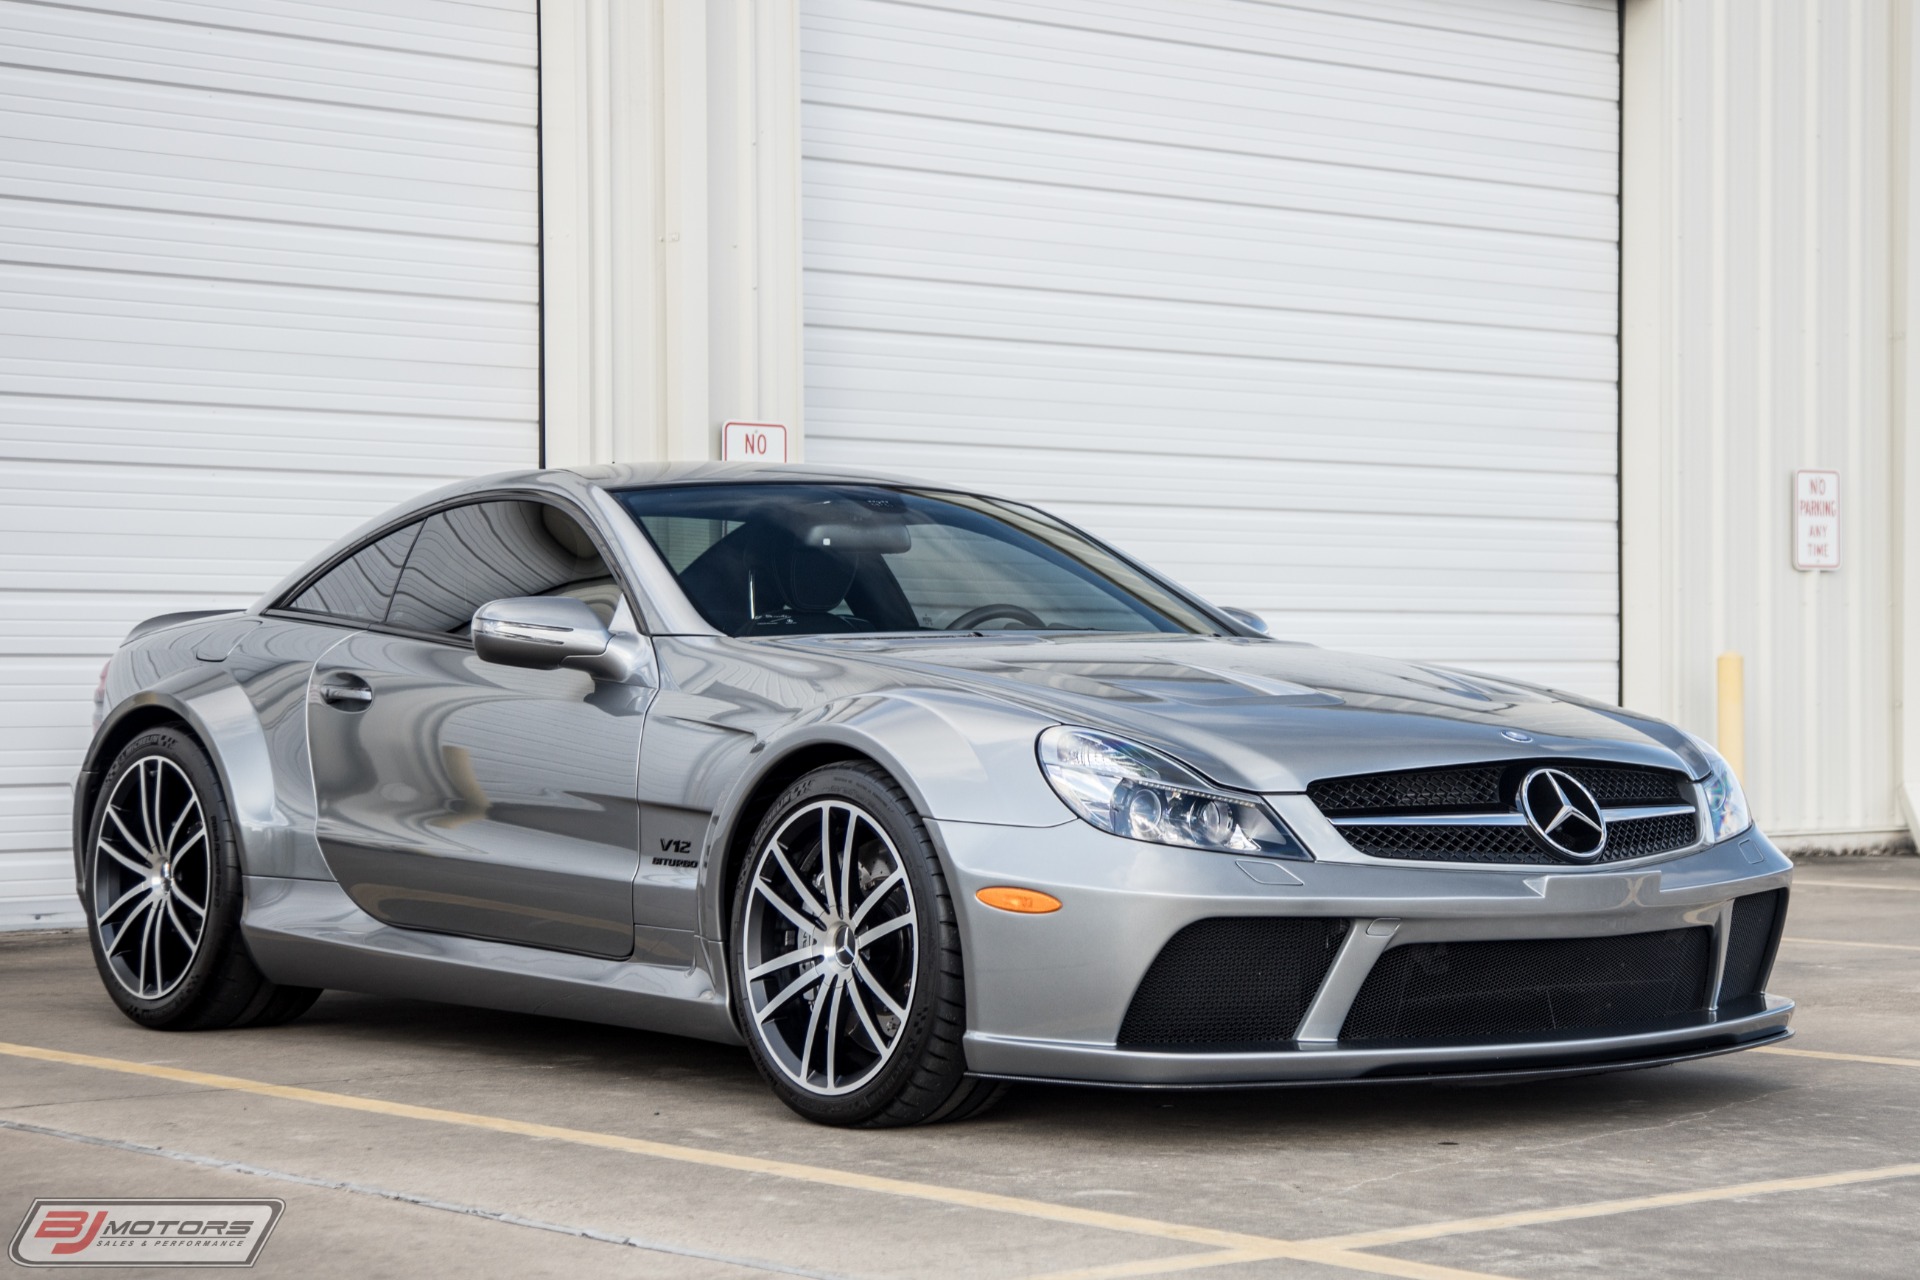 Used 09 Mercedes Benz Sl65 Amg Black Series For Sale Special Pricing Bj Motors Stock 9f